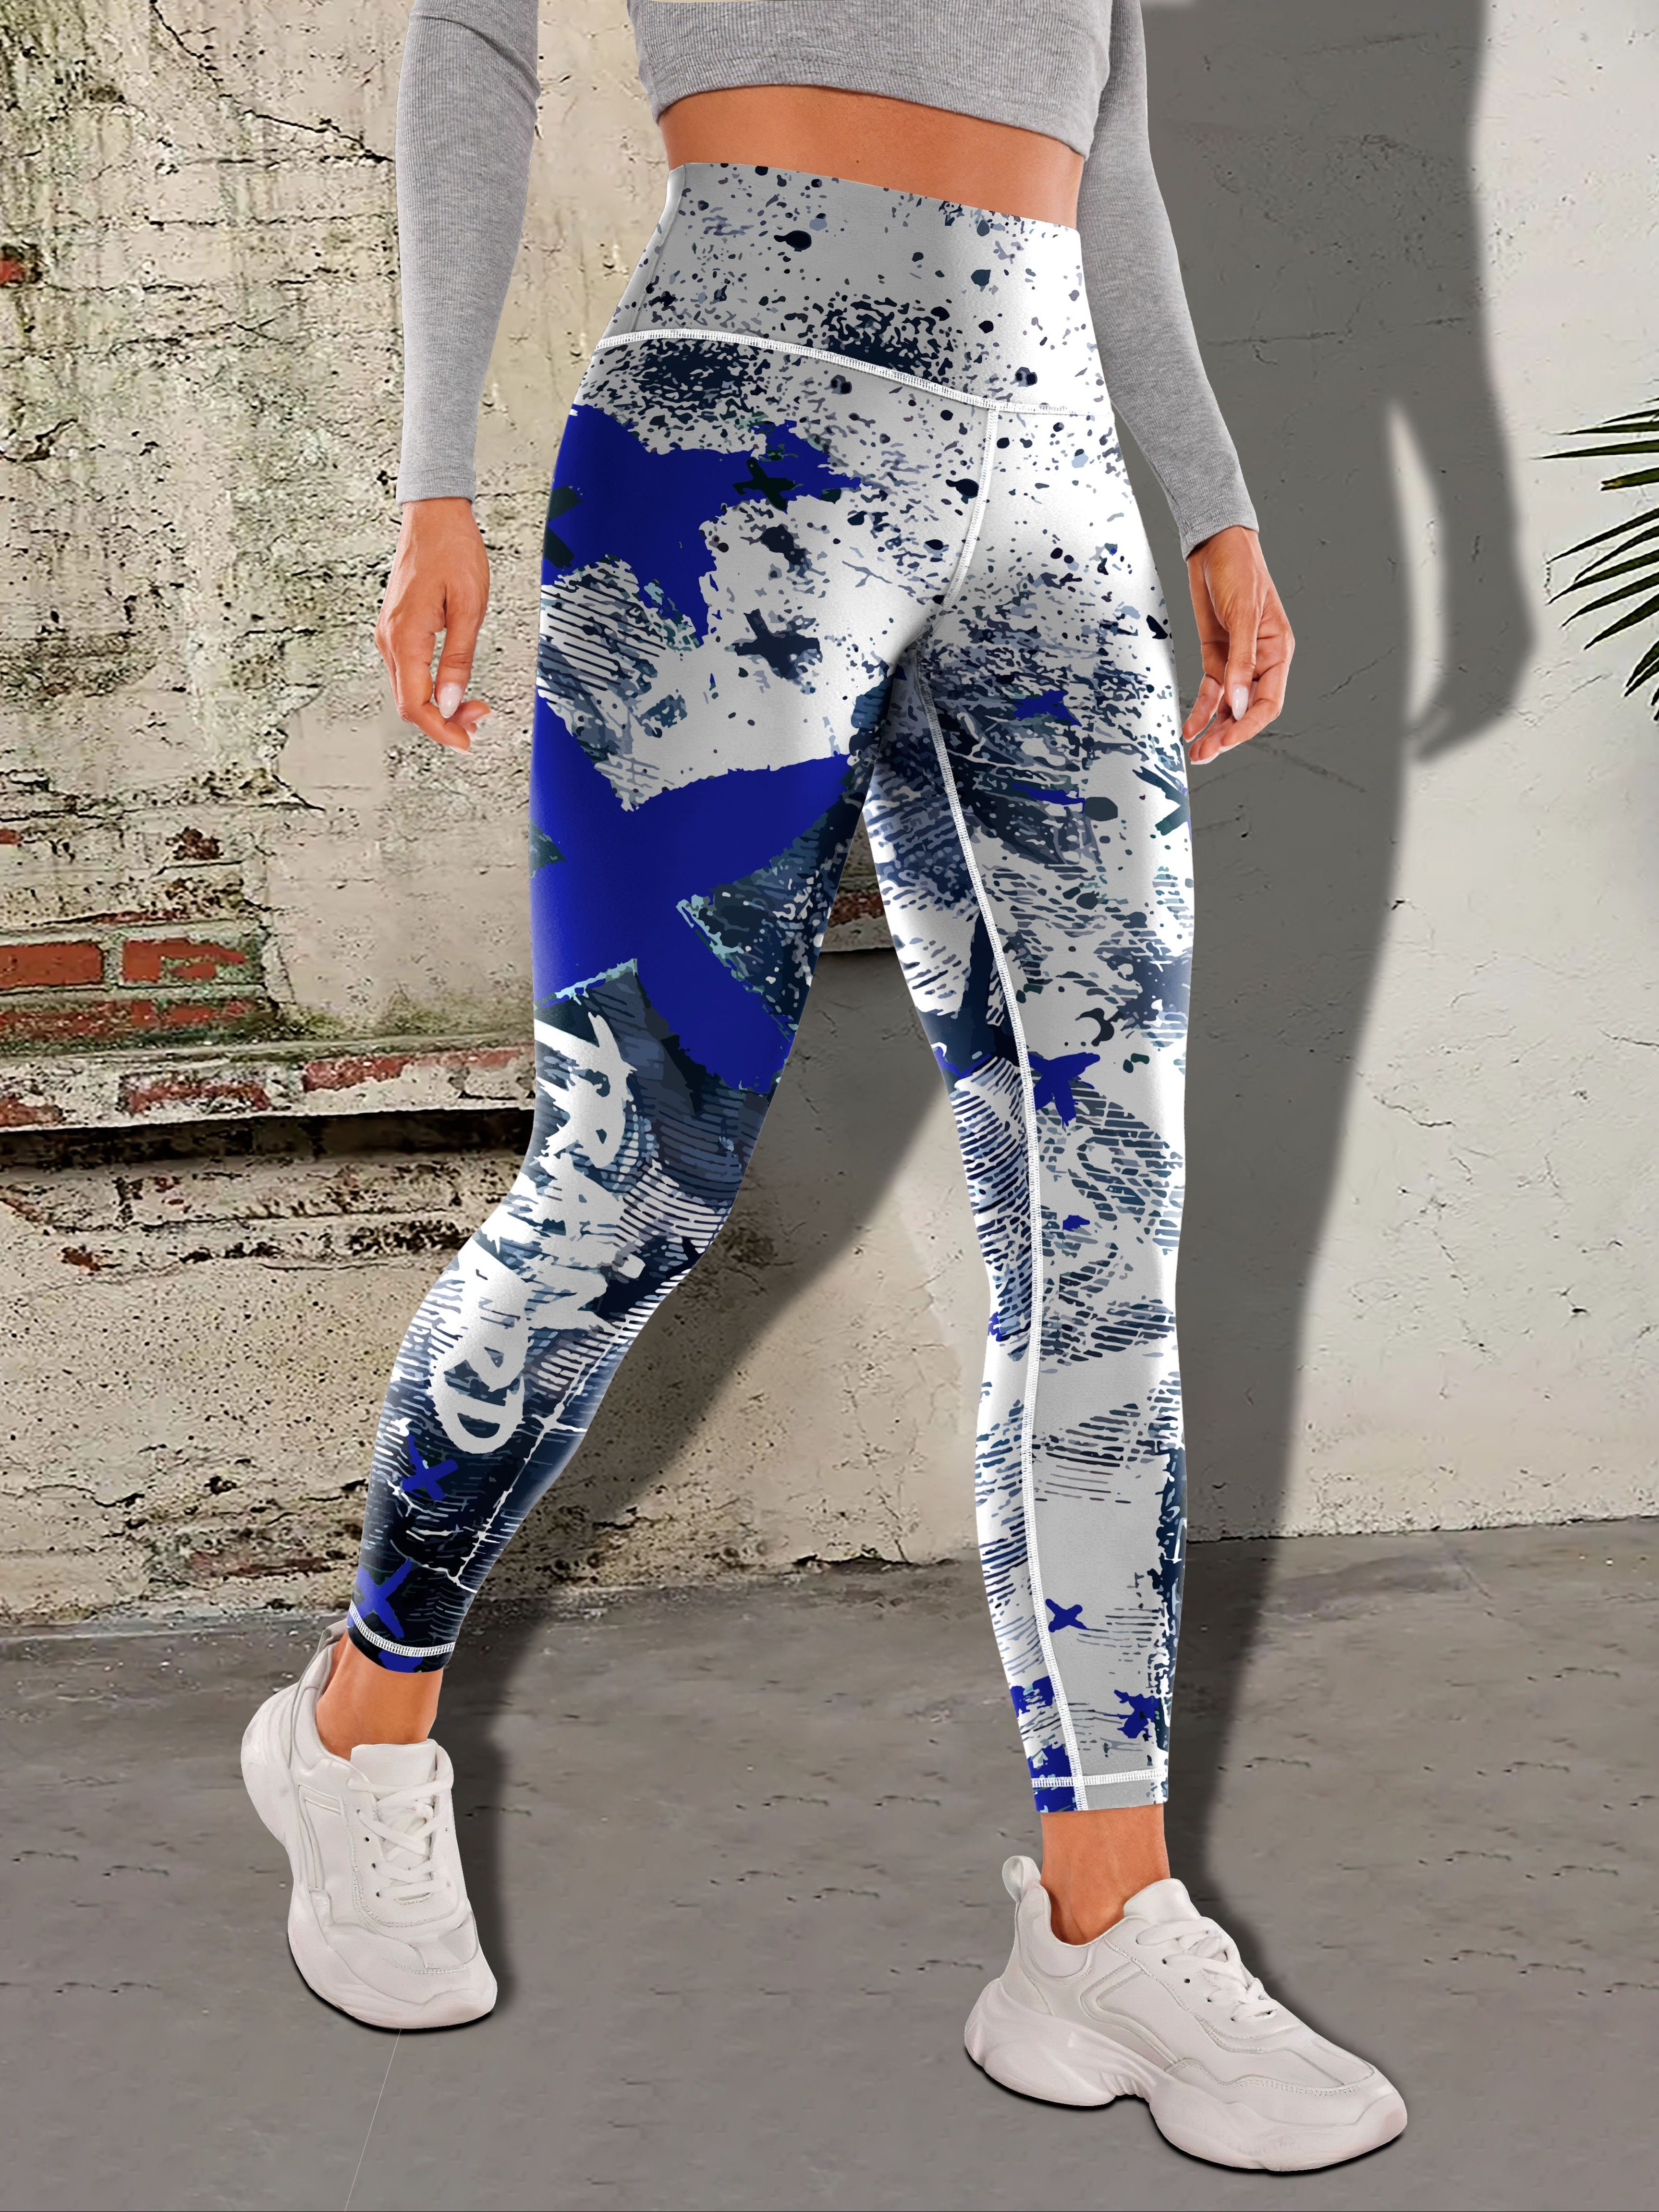 Women's Activewear: Letter Print * Sexy Leggings with Hip Lifting Side  Pocket Yoga Pants for Sports & Casual Wear